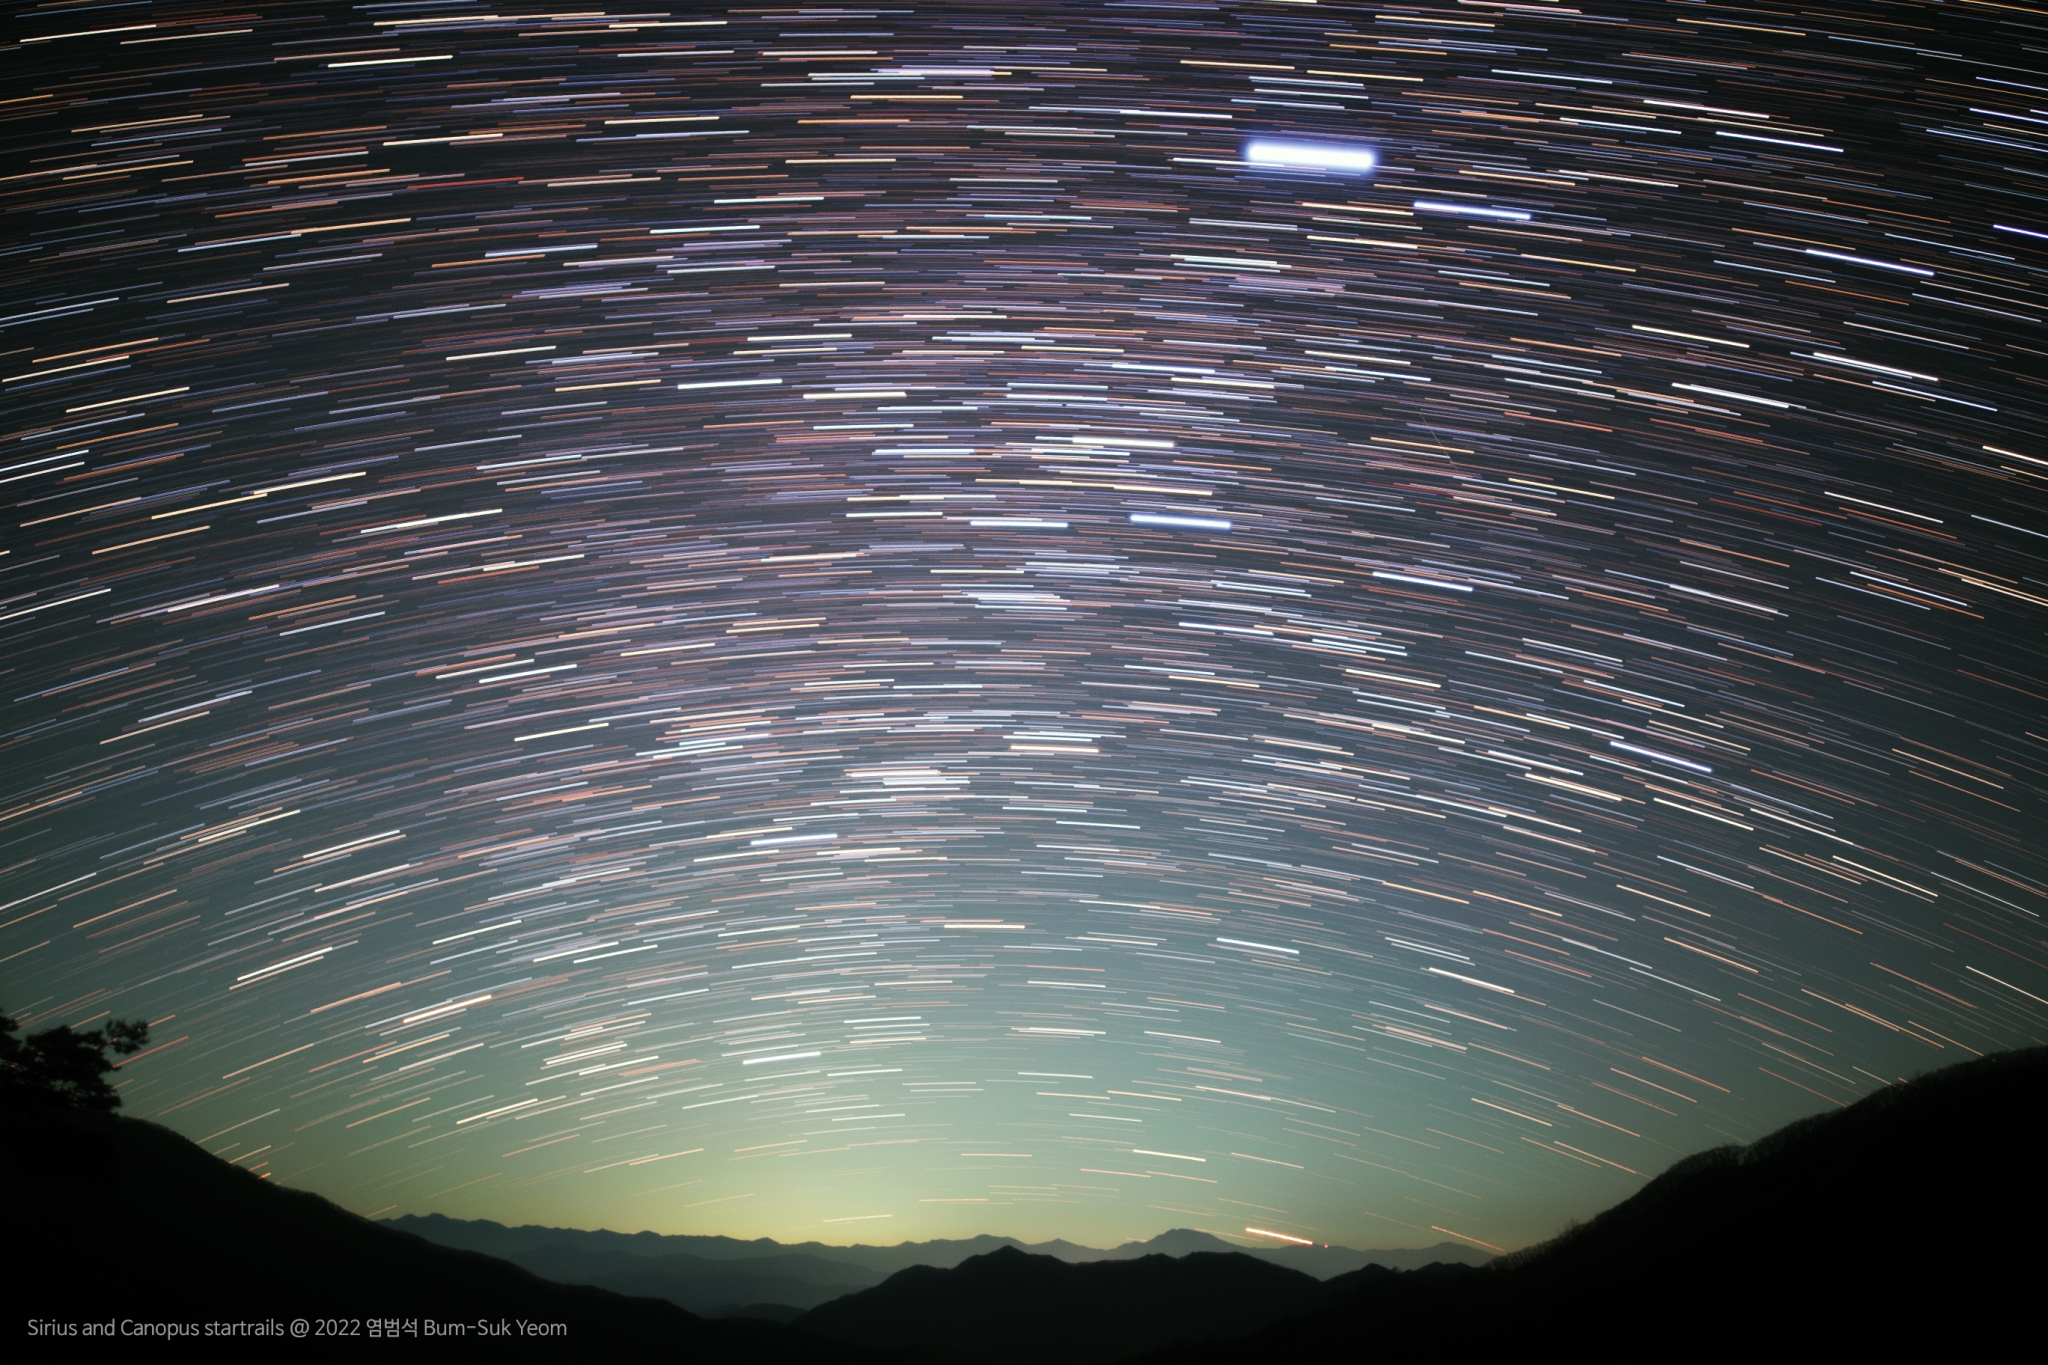 canopus_startrails_220130_med_bsyeom